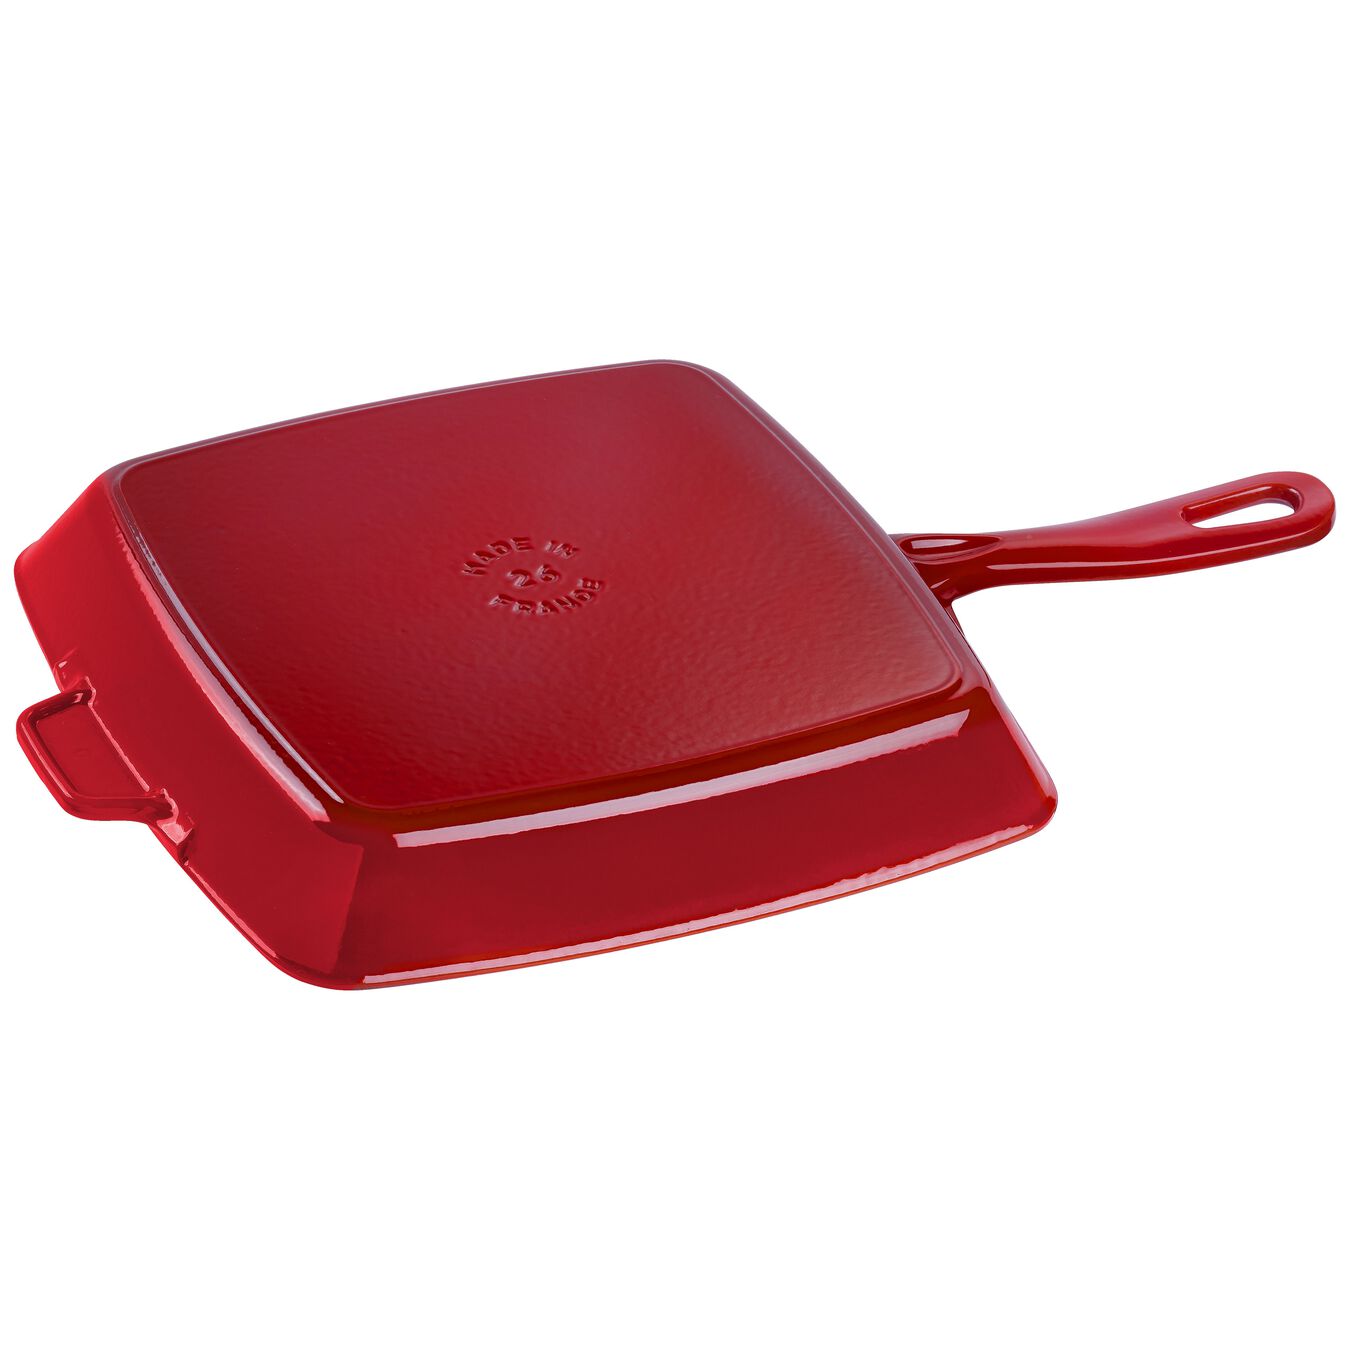 26 cm cast iron square American grill, cherry,,large 2